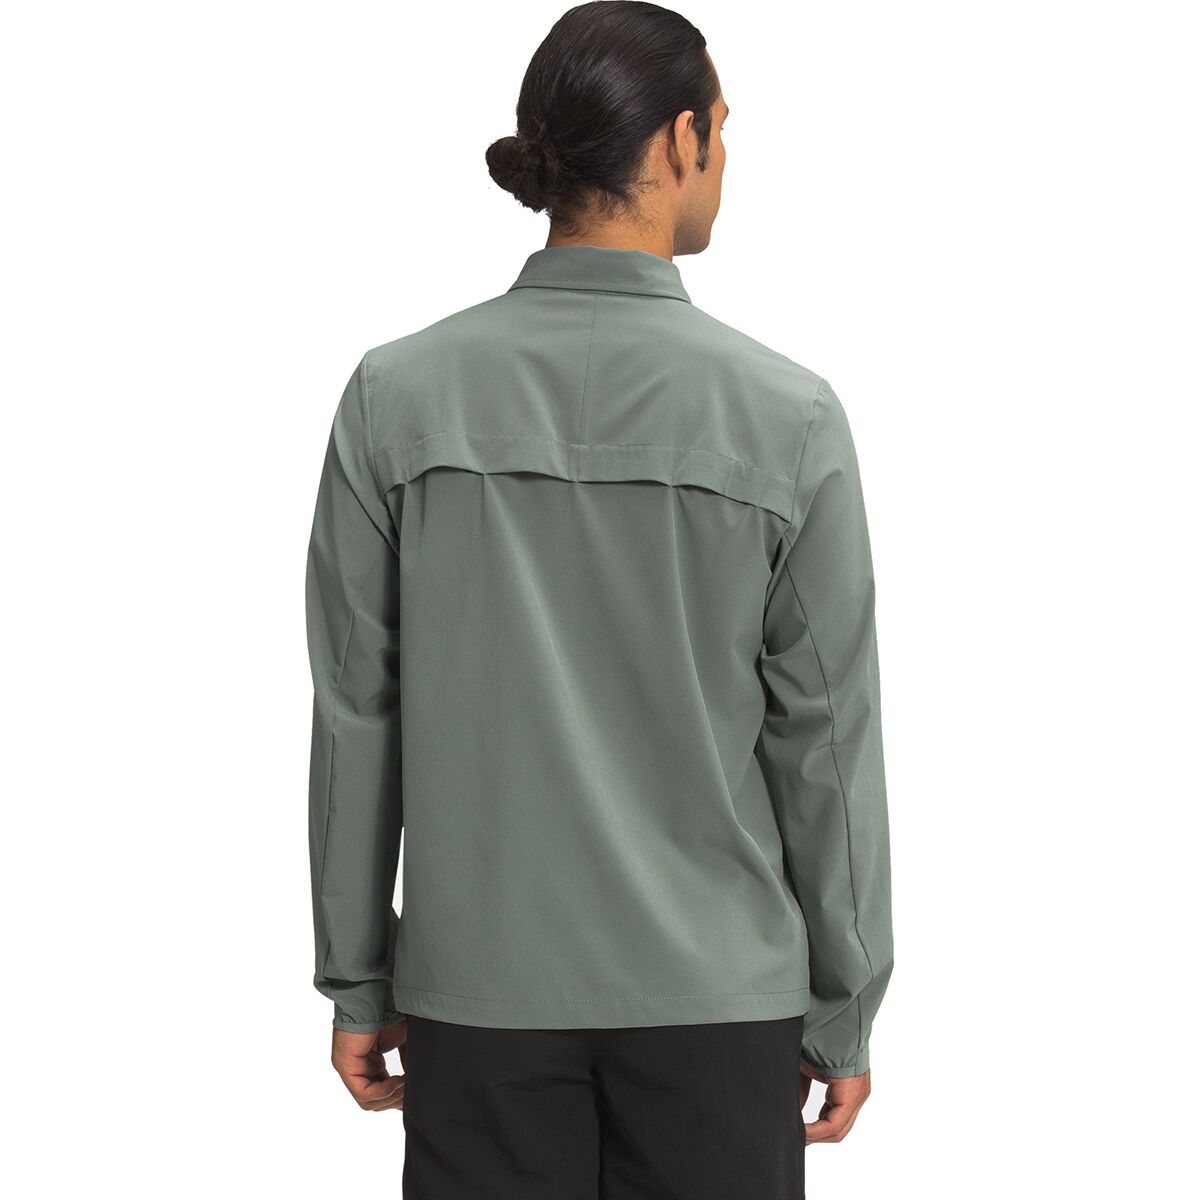 The North Face First Trail UPF Long-Sleeve Shirt - Men's - Hike & Camp